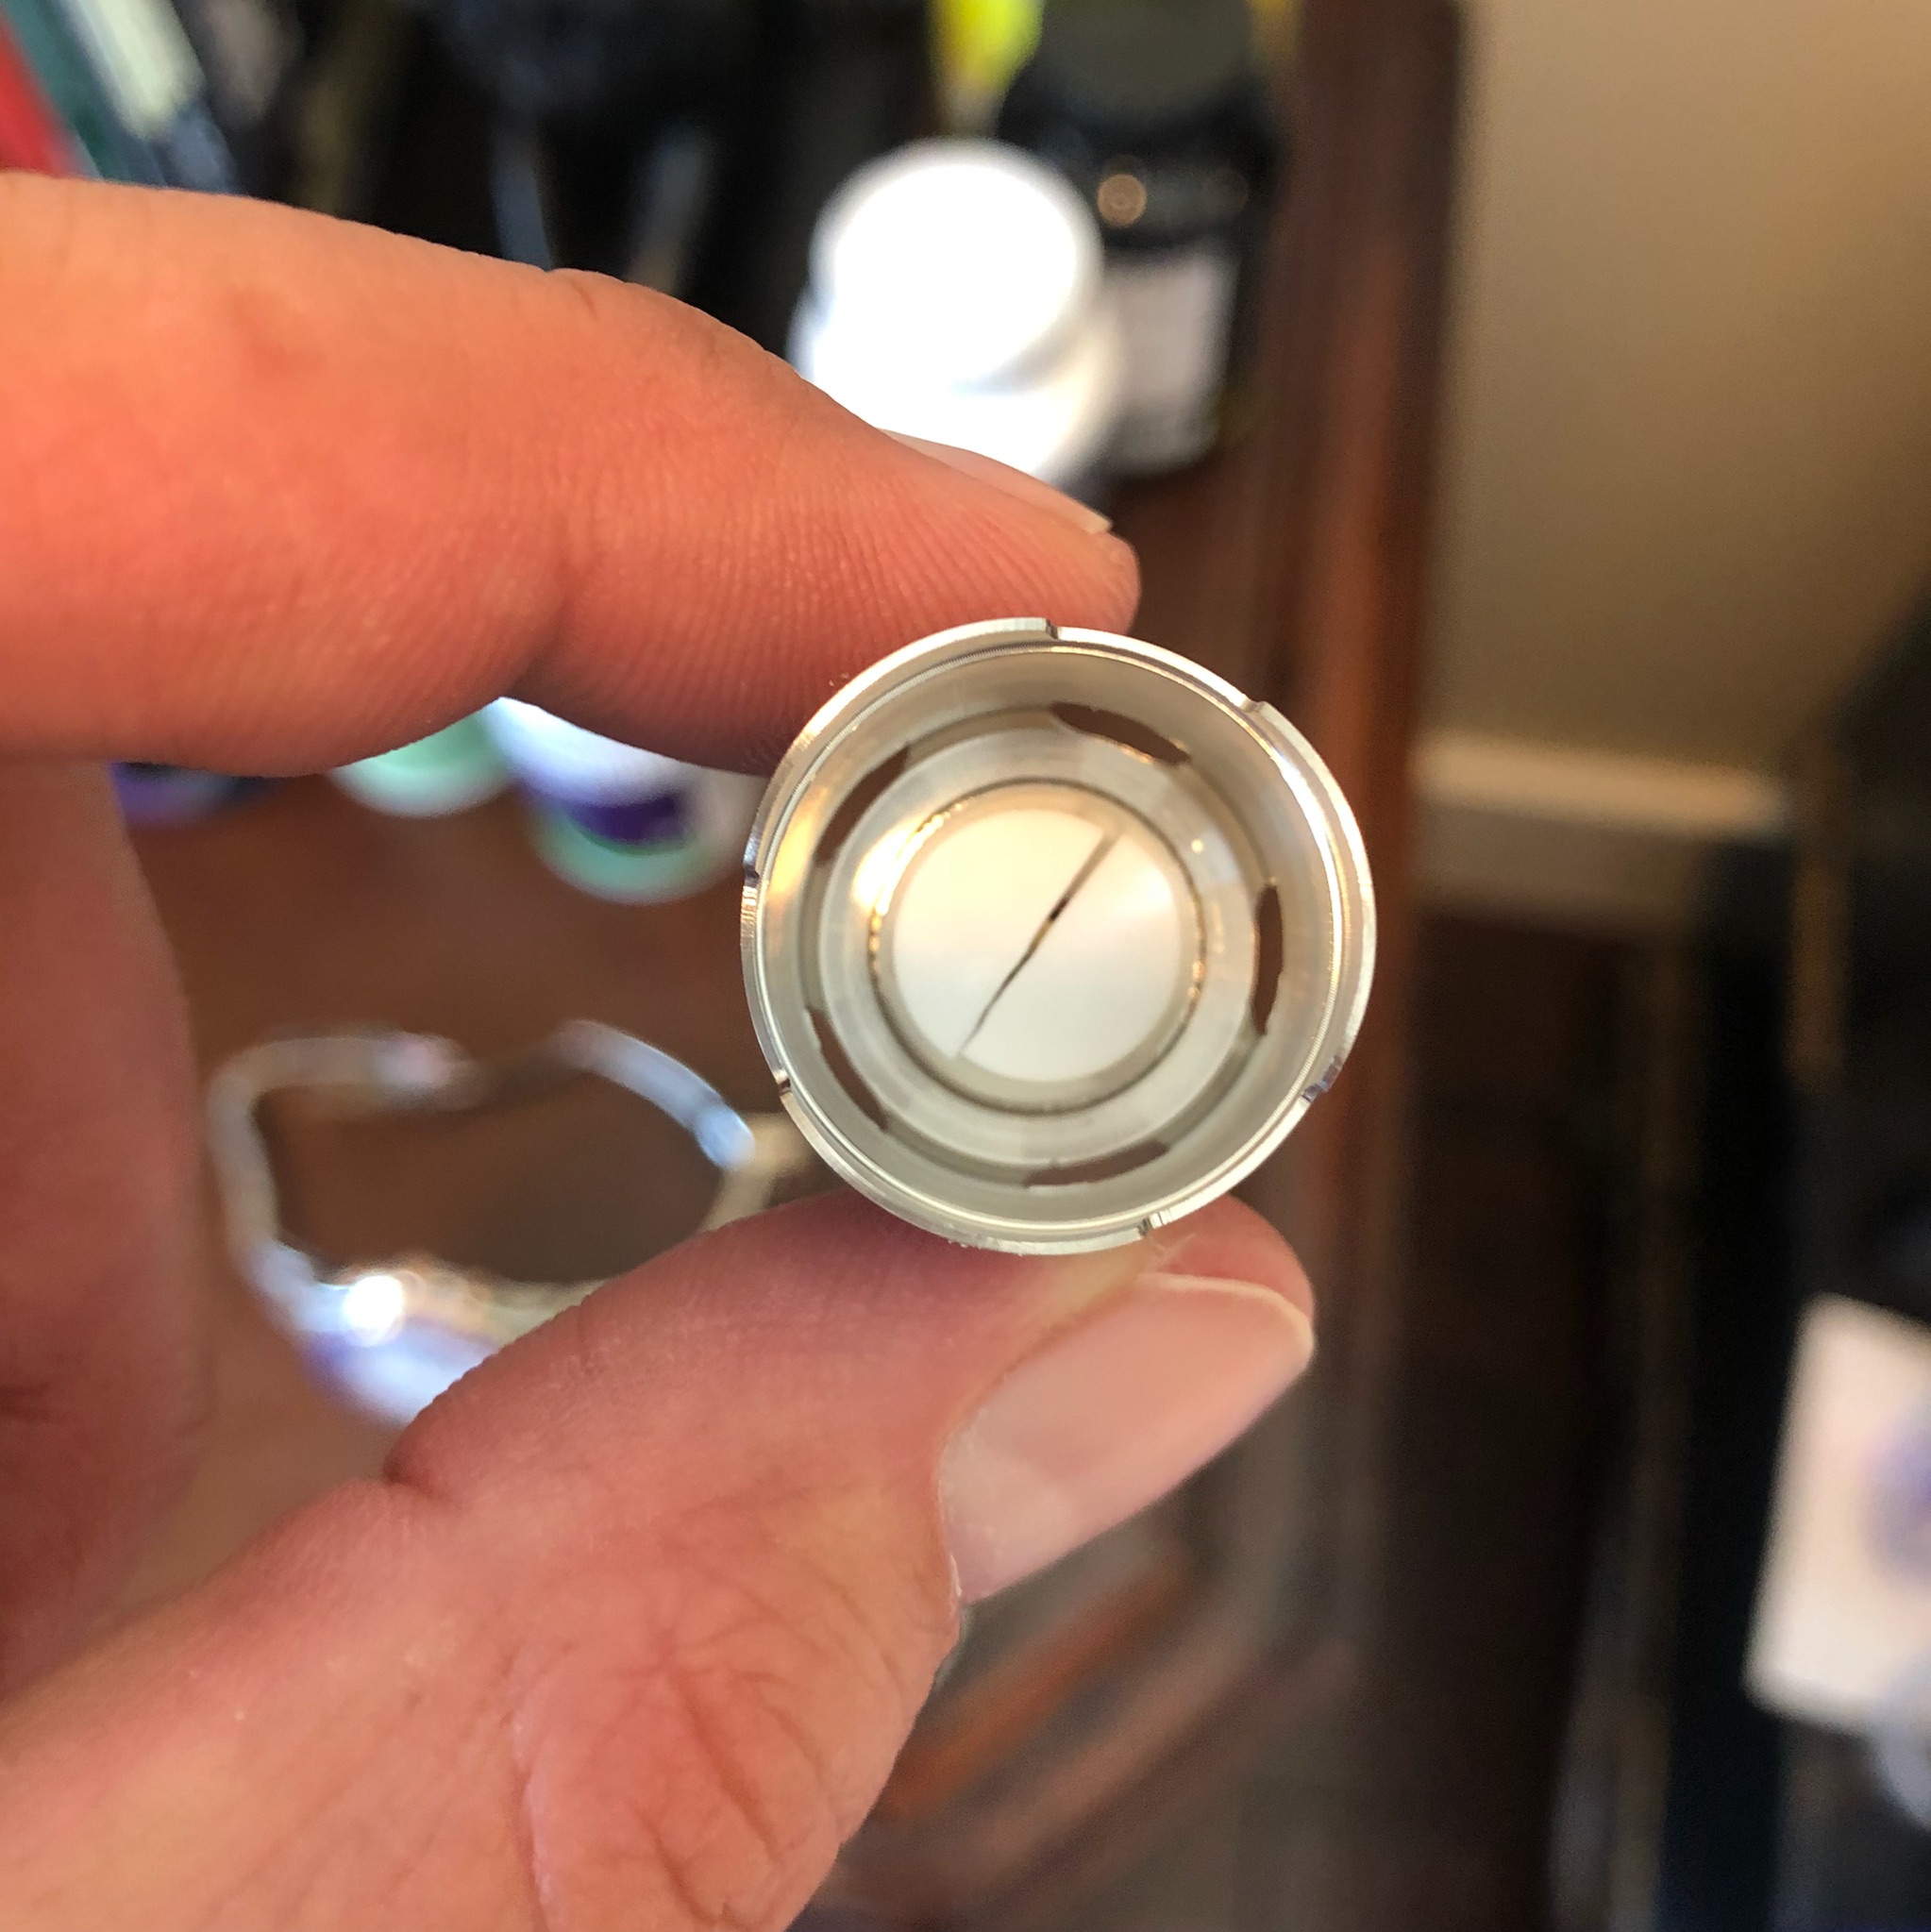 Broken Ceramic Heating Element After First Use